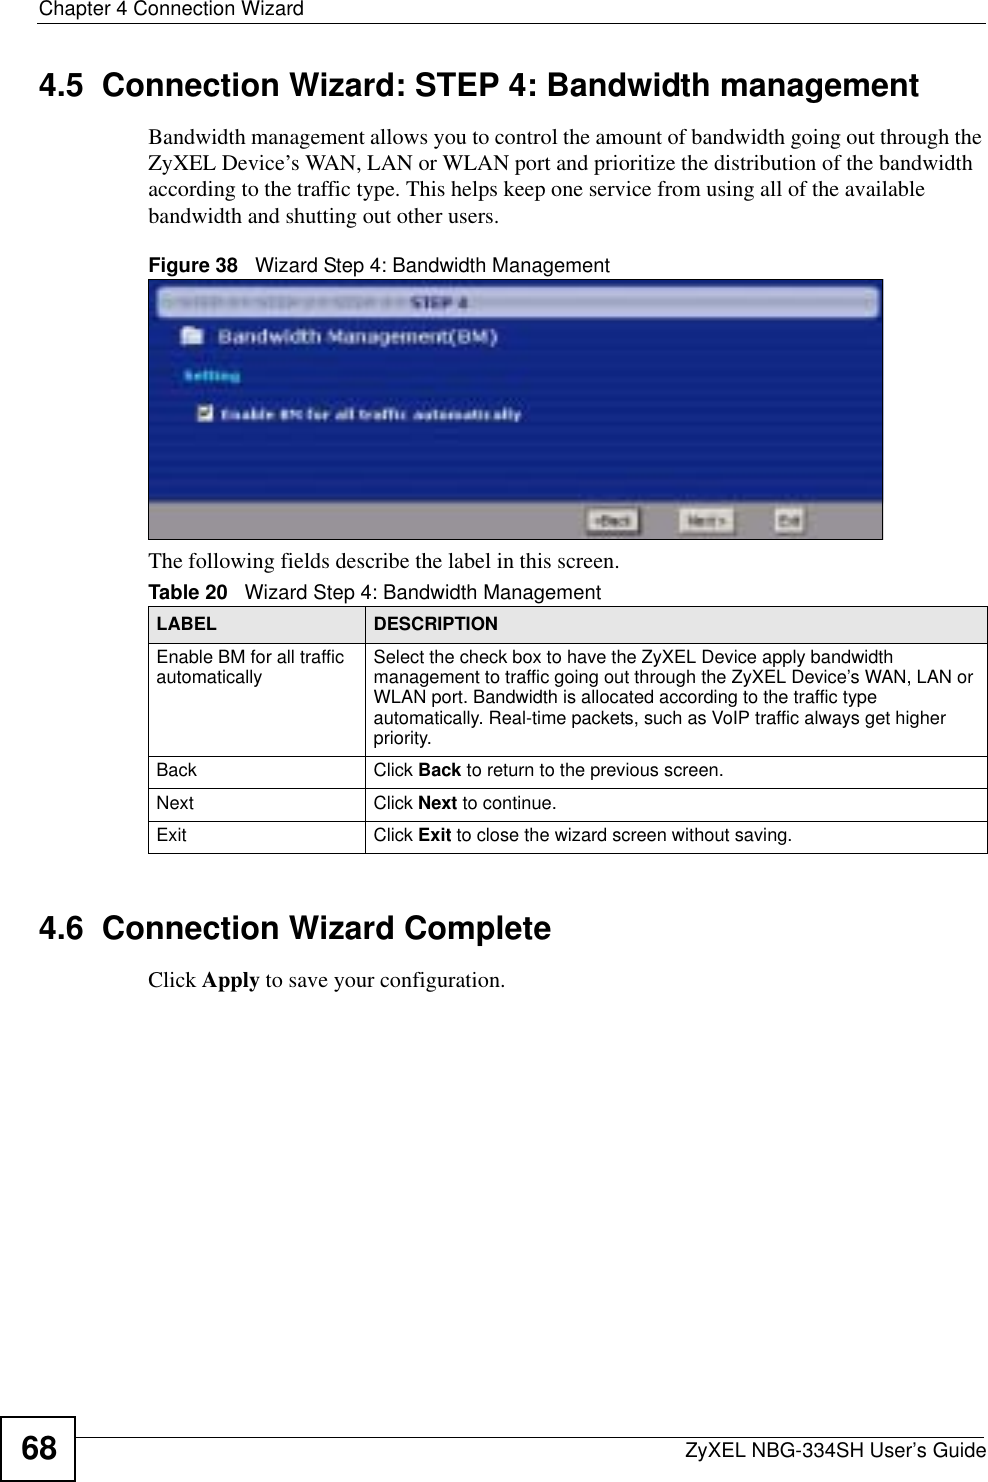 Chapter 4 Connection WizardZyXEL NBG-334SH User’s Guide684.5  Connection Wizard: STEP 4: Bandwidth managementBandwidth management allows you to control the amount of bandwidth going out through the ZyXEL Device’s WAN, LAN or WLAN port and prioritize the distribution of the bandwidth according to the traffic type. This helps keep one service from using all of the available bandwidth and shutting out other users.Figure 38   Wizard Step 4: Bandwidth Management The following fields describe the label in this screen.4.6  Connection Wizard CompleteClick Apply to save your configuration.Table 20   Wizard Step 4: Bandwidth ManagementLABEL DESCRIPTIONEnable BM for all traffic automatically Select the check box to have the ZyXEL Device apply bandwidth management to traffic going out through the ZyXEL Device’s WAN, LAN or WLAN port. Bandwidth is allocated according to the traffic type automatically. Real-time packets, such as VoIP traffic always get higher priority.Back Click Back to return to the previous screen.Next Click Next to continue. Exit Click Exit to close the wizard screen without saving.